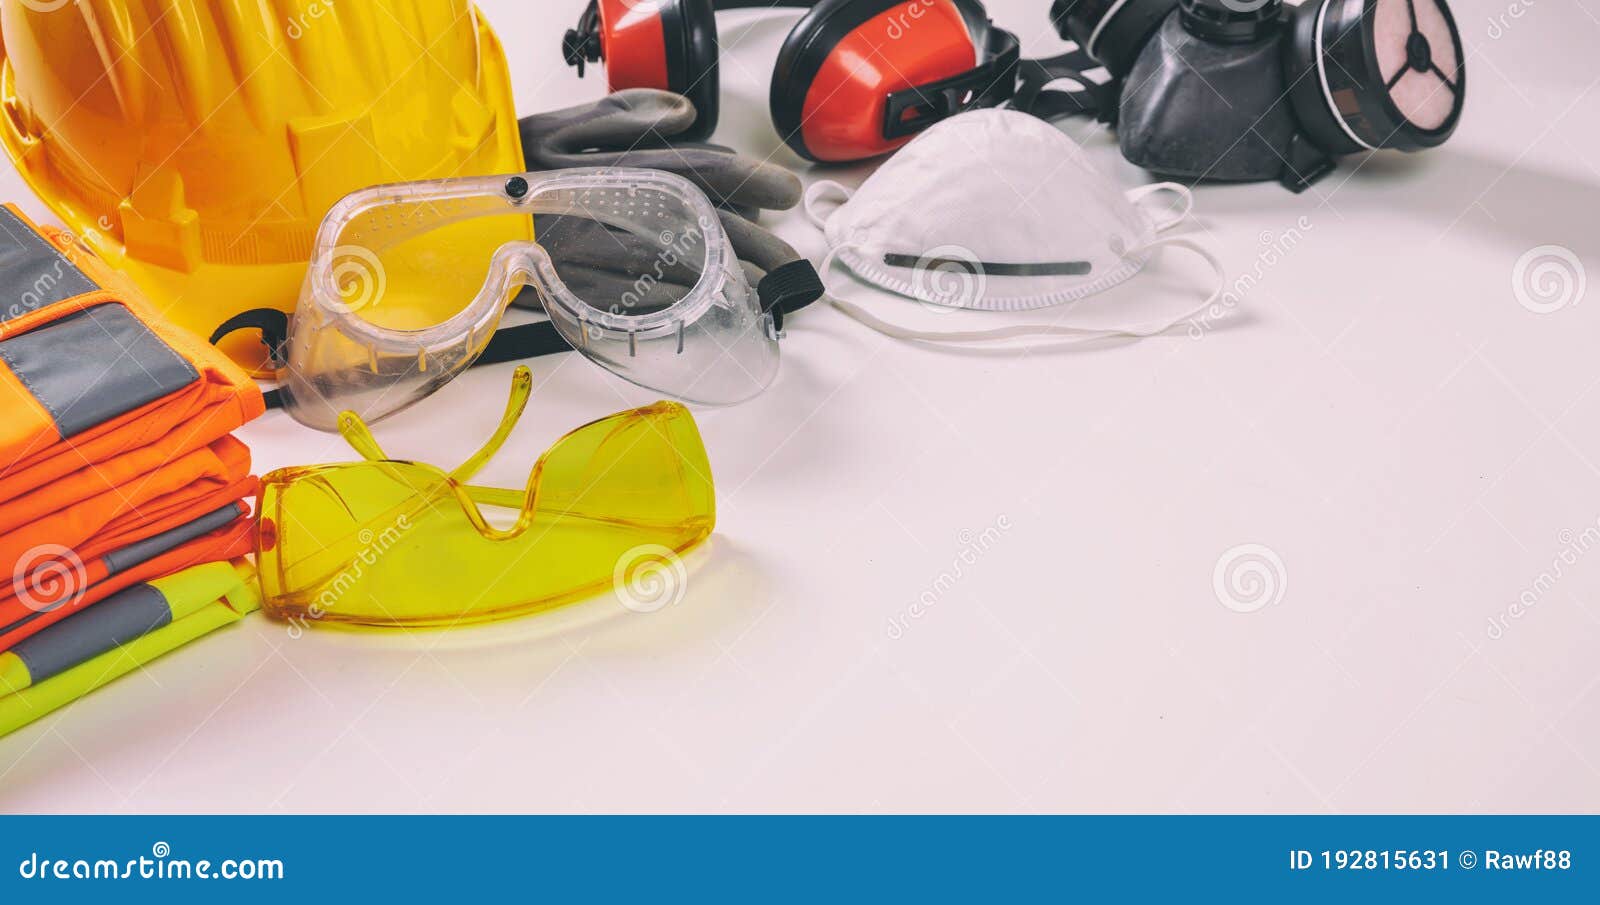 work safety protection equipment background. industrial protective gear on white